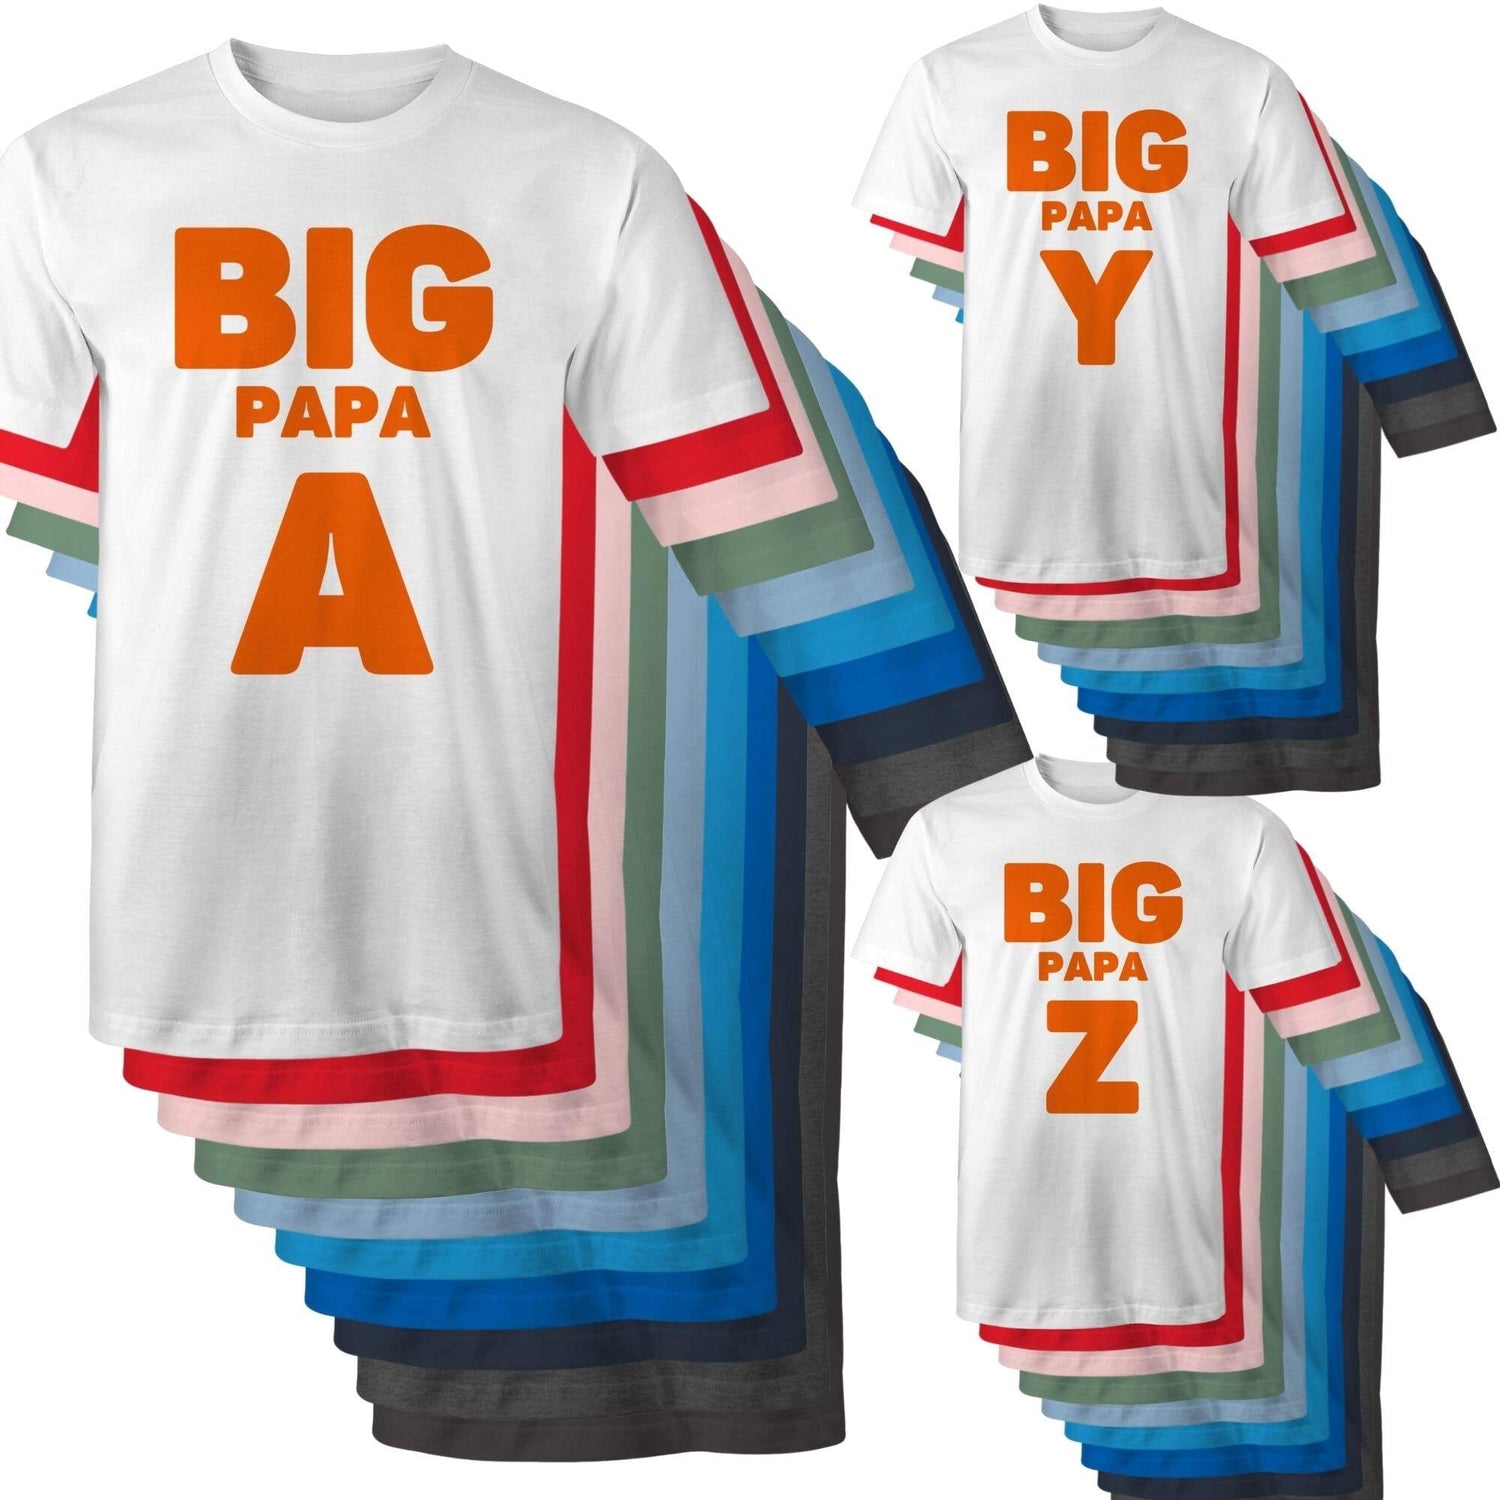 Big Papa T-shirt A - Z for all dads including plus sizes. - Best birthday Father's Day gift - Da Boss Mango